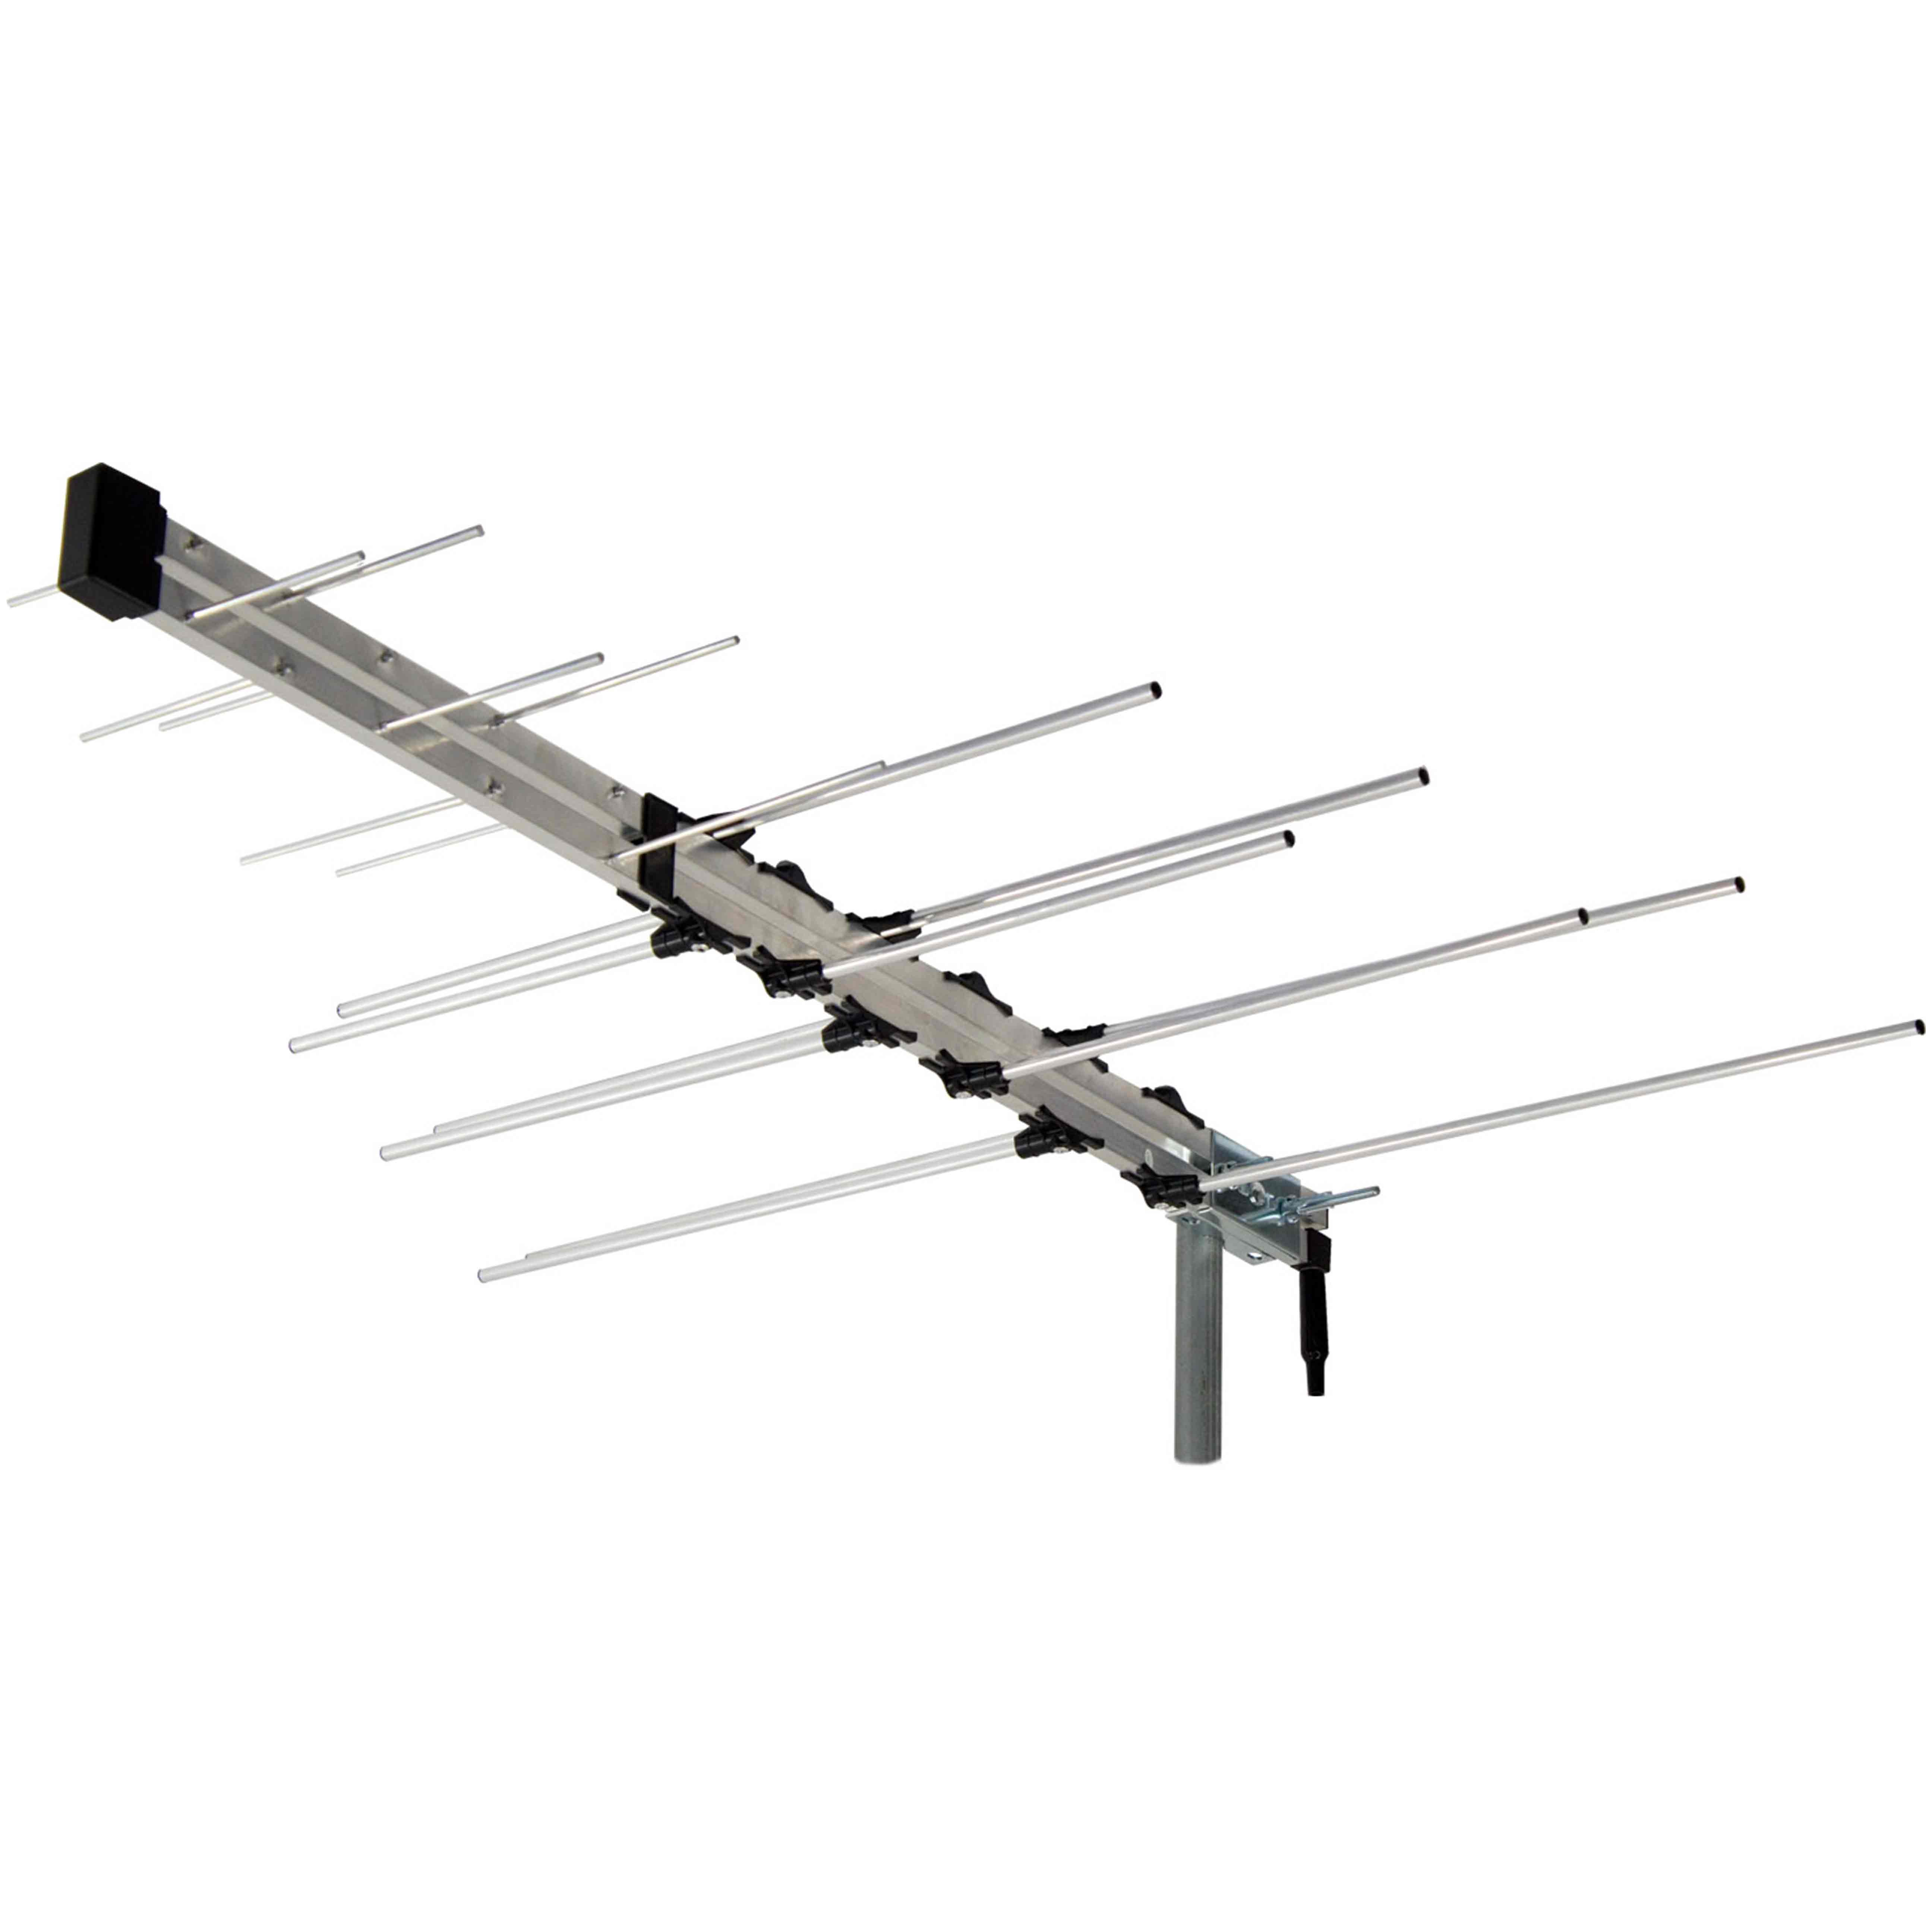 Folding Log-Periodic Digital TV Antenna for Channels 6-51 - Click for more info